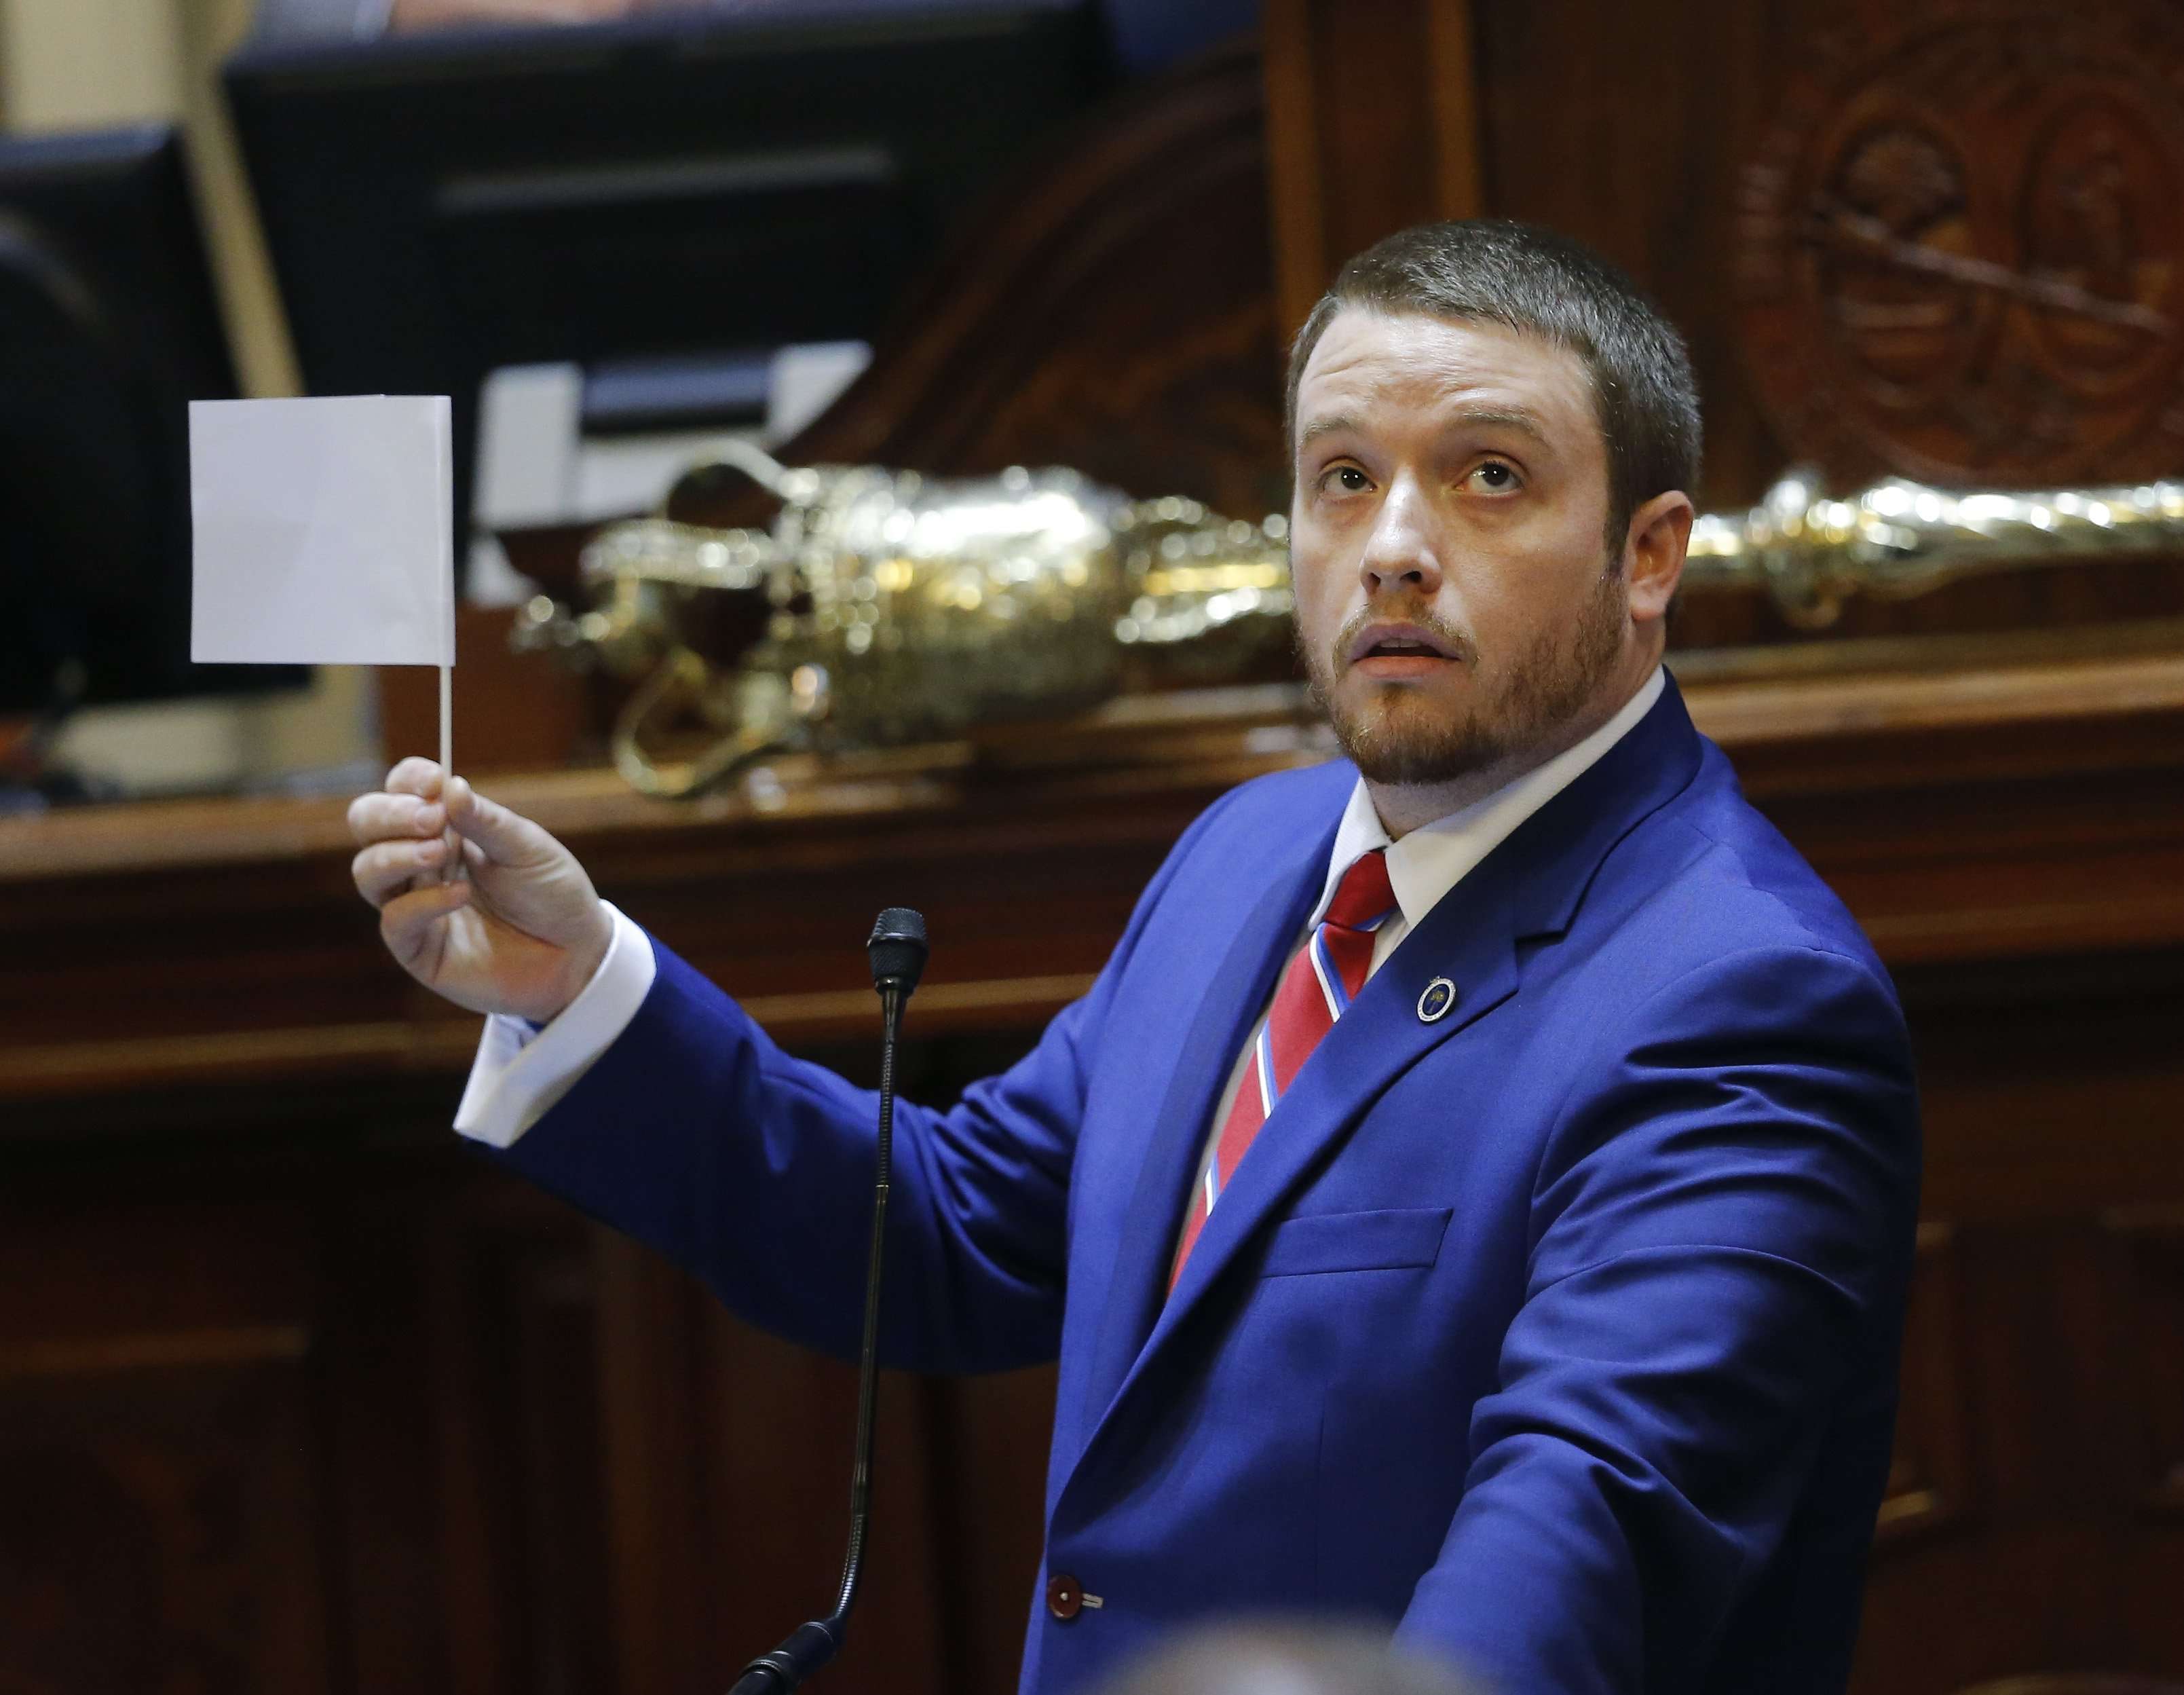 image for Chris Corley, ex-legislator known for Confederate flag stand, to plead guilty in attack on wife